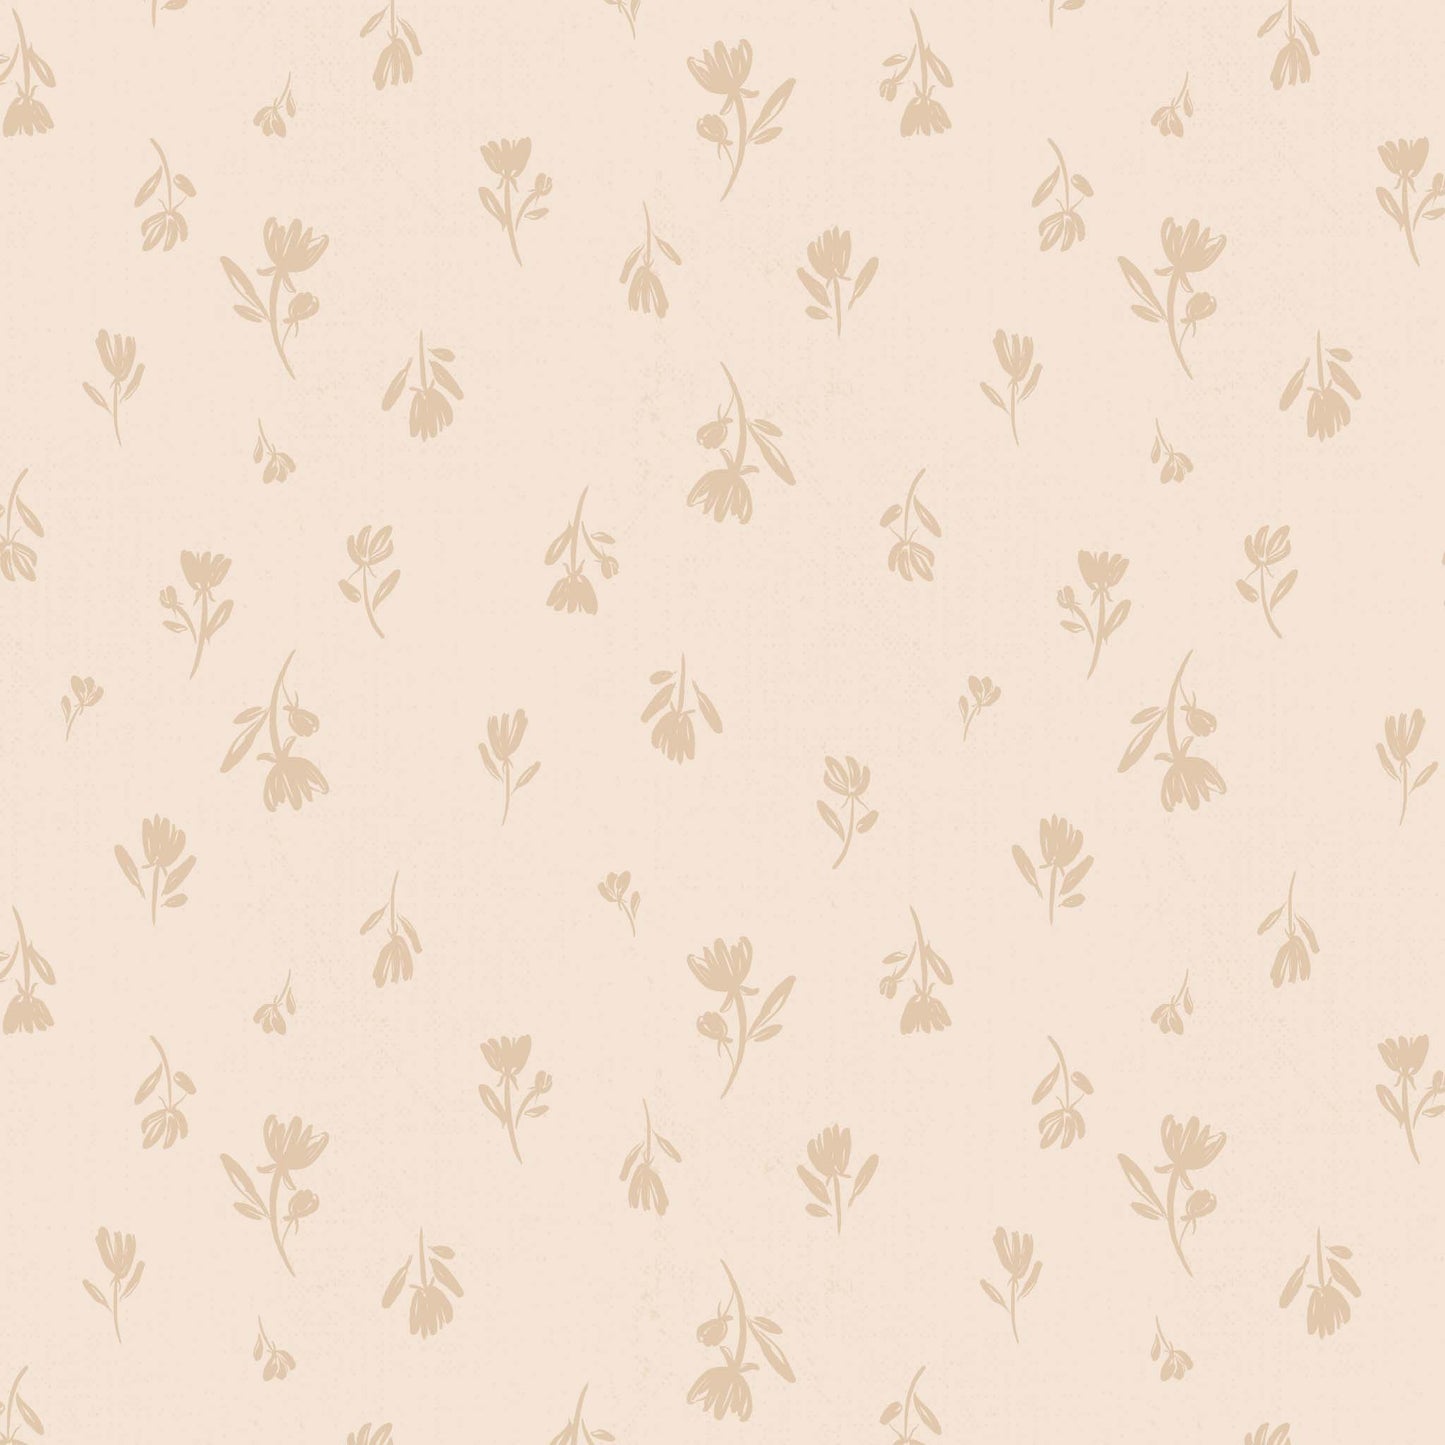 Close up featuring Cayla Naylor Annette-Dogwood Peel and Stick Wallpaper - a floral pattern